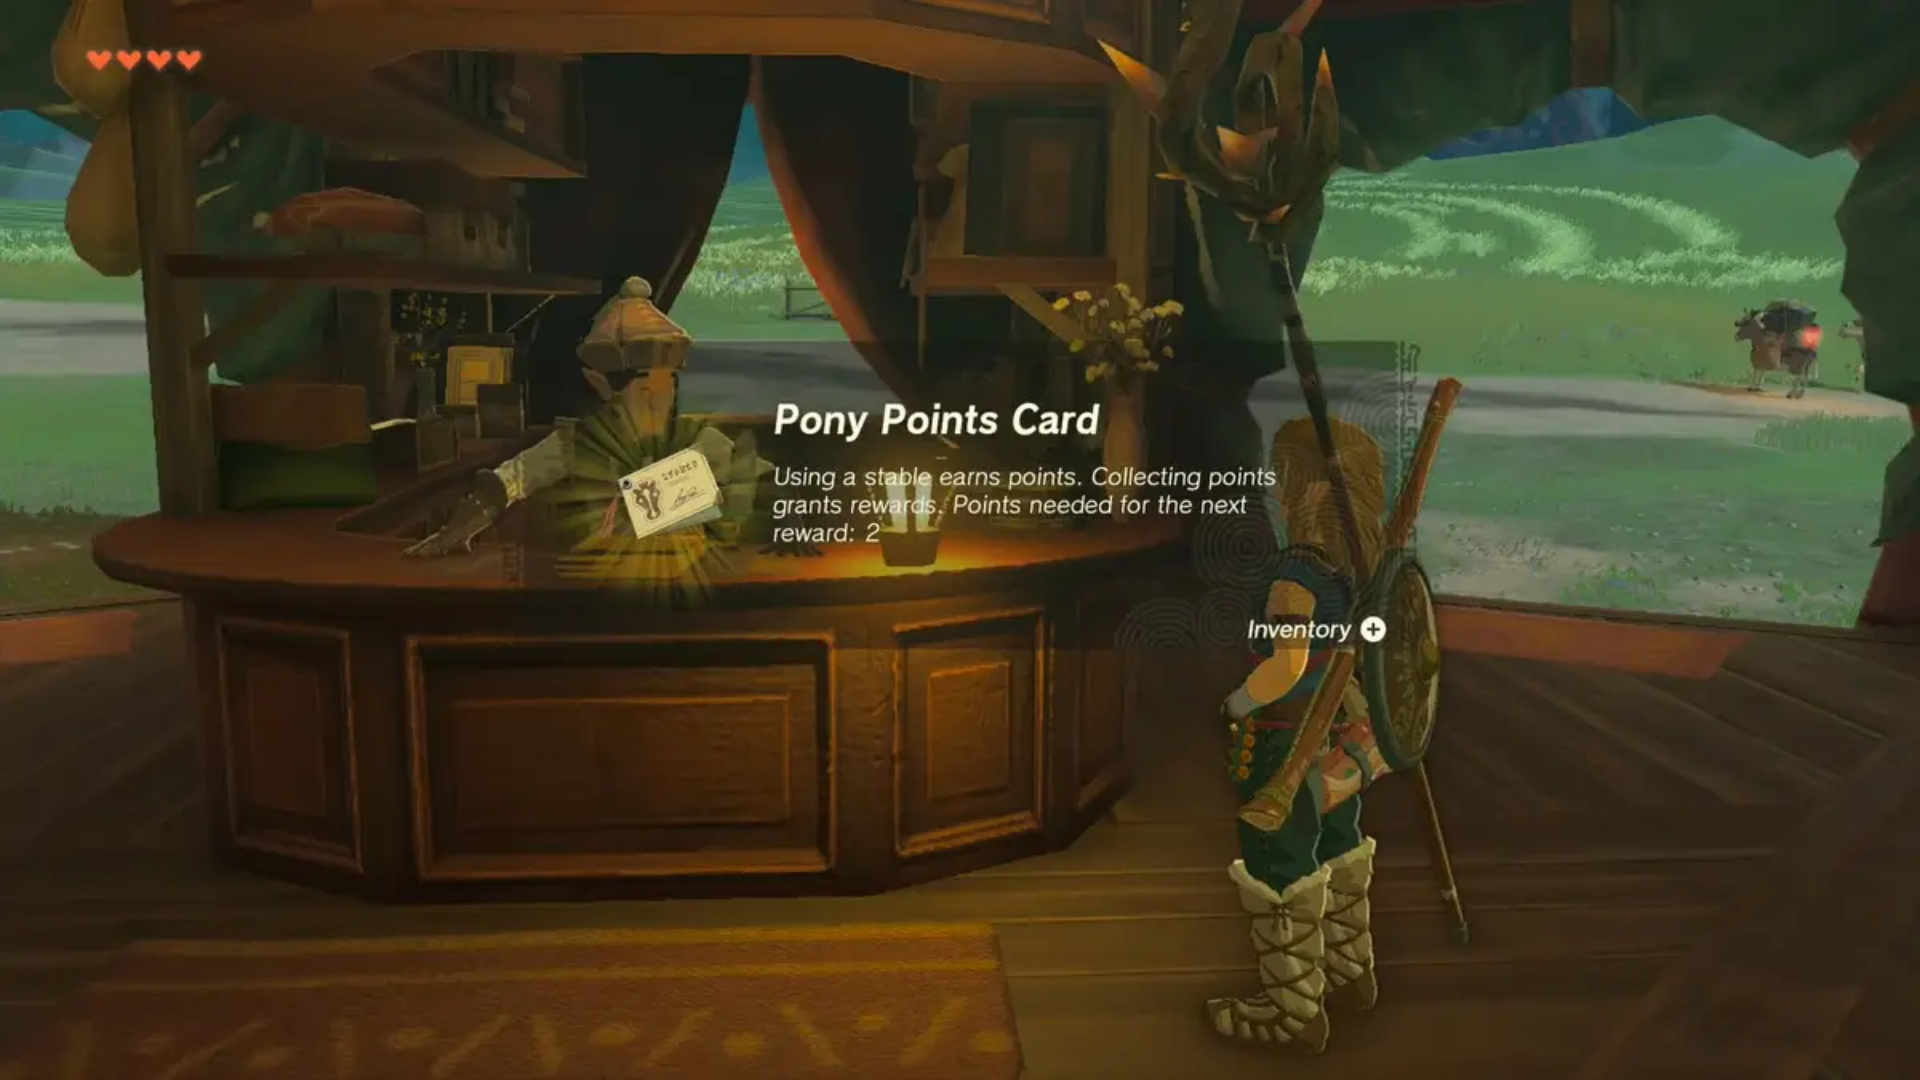 An image of Link receiving a Pony Points Card in Tears of the Kingdom